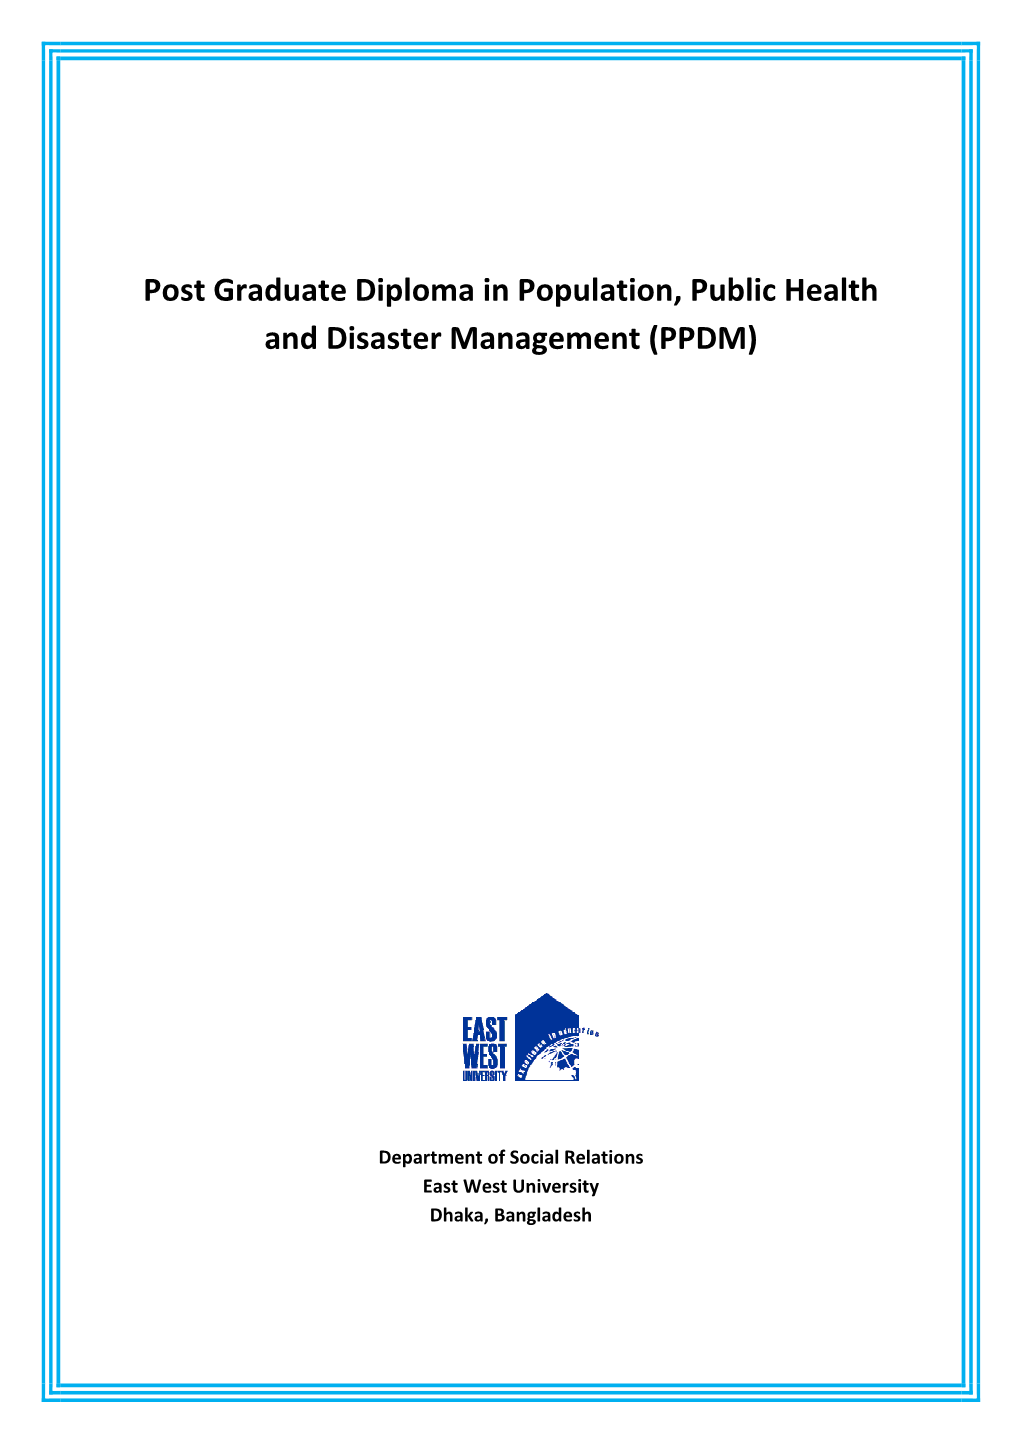 Course Curriculum of Post Graduate Diploma in Population, Public Health and Disaster Management (PPDM)